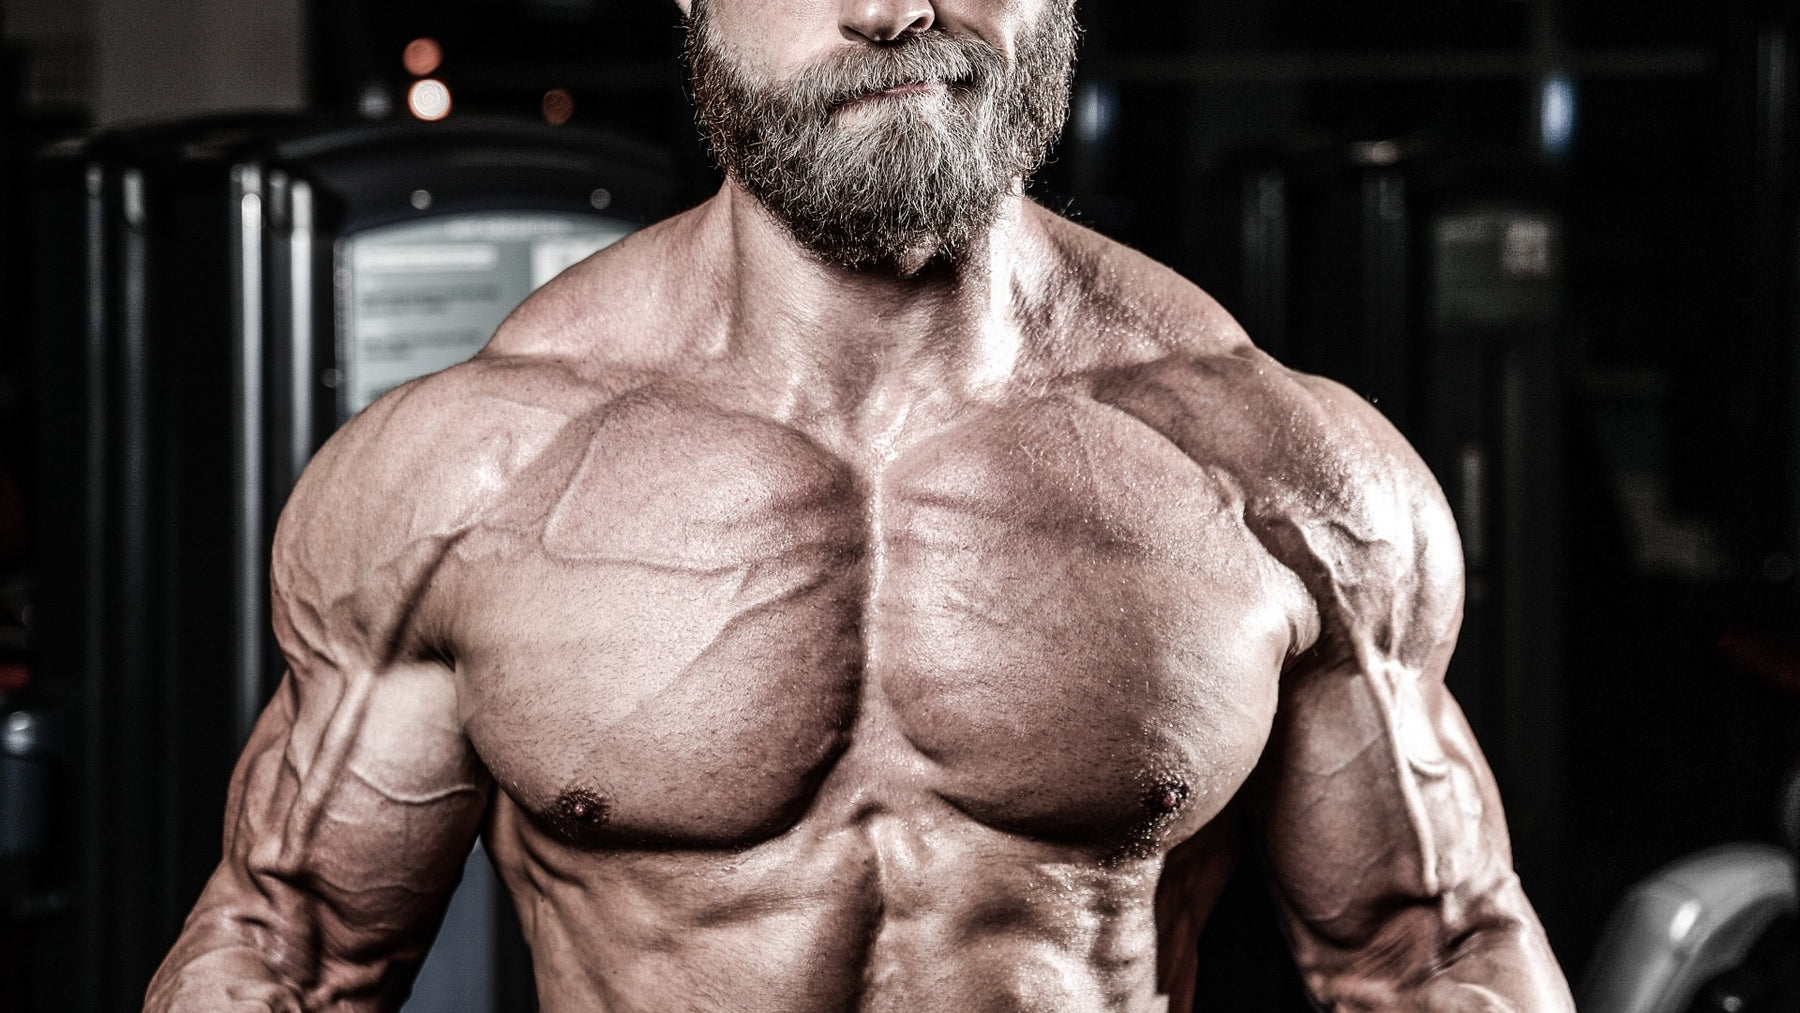 Bodybuilding Over 40: How to Train and Gain